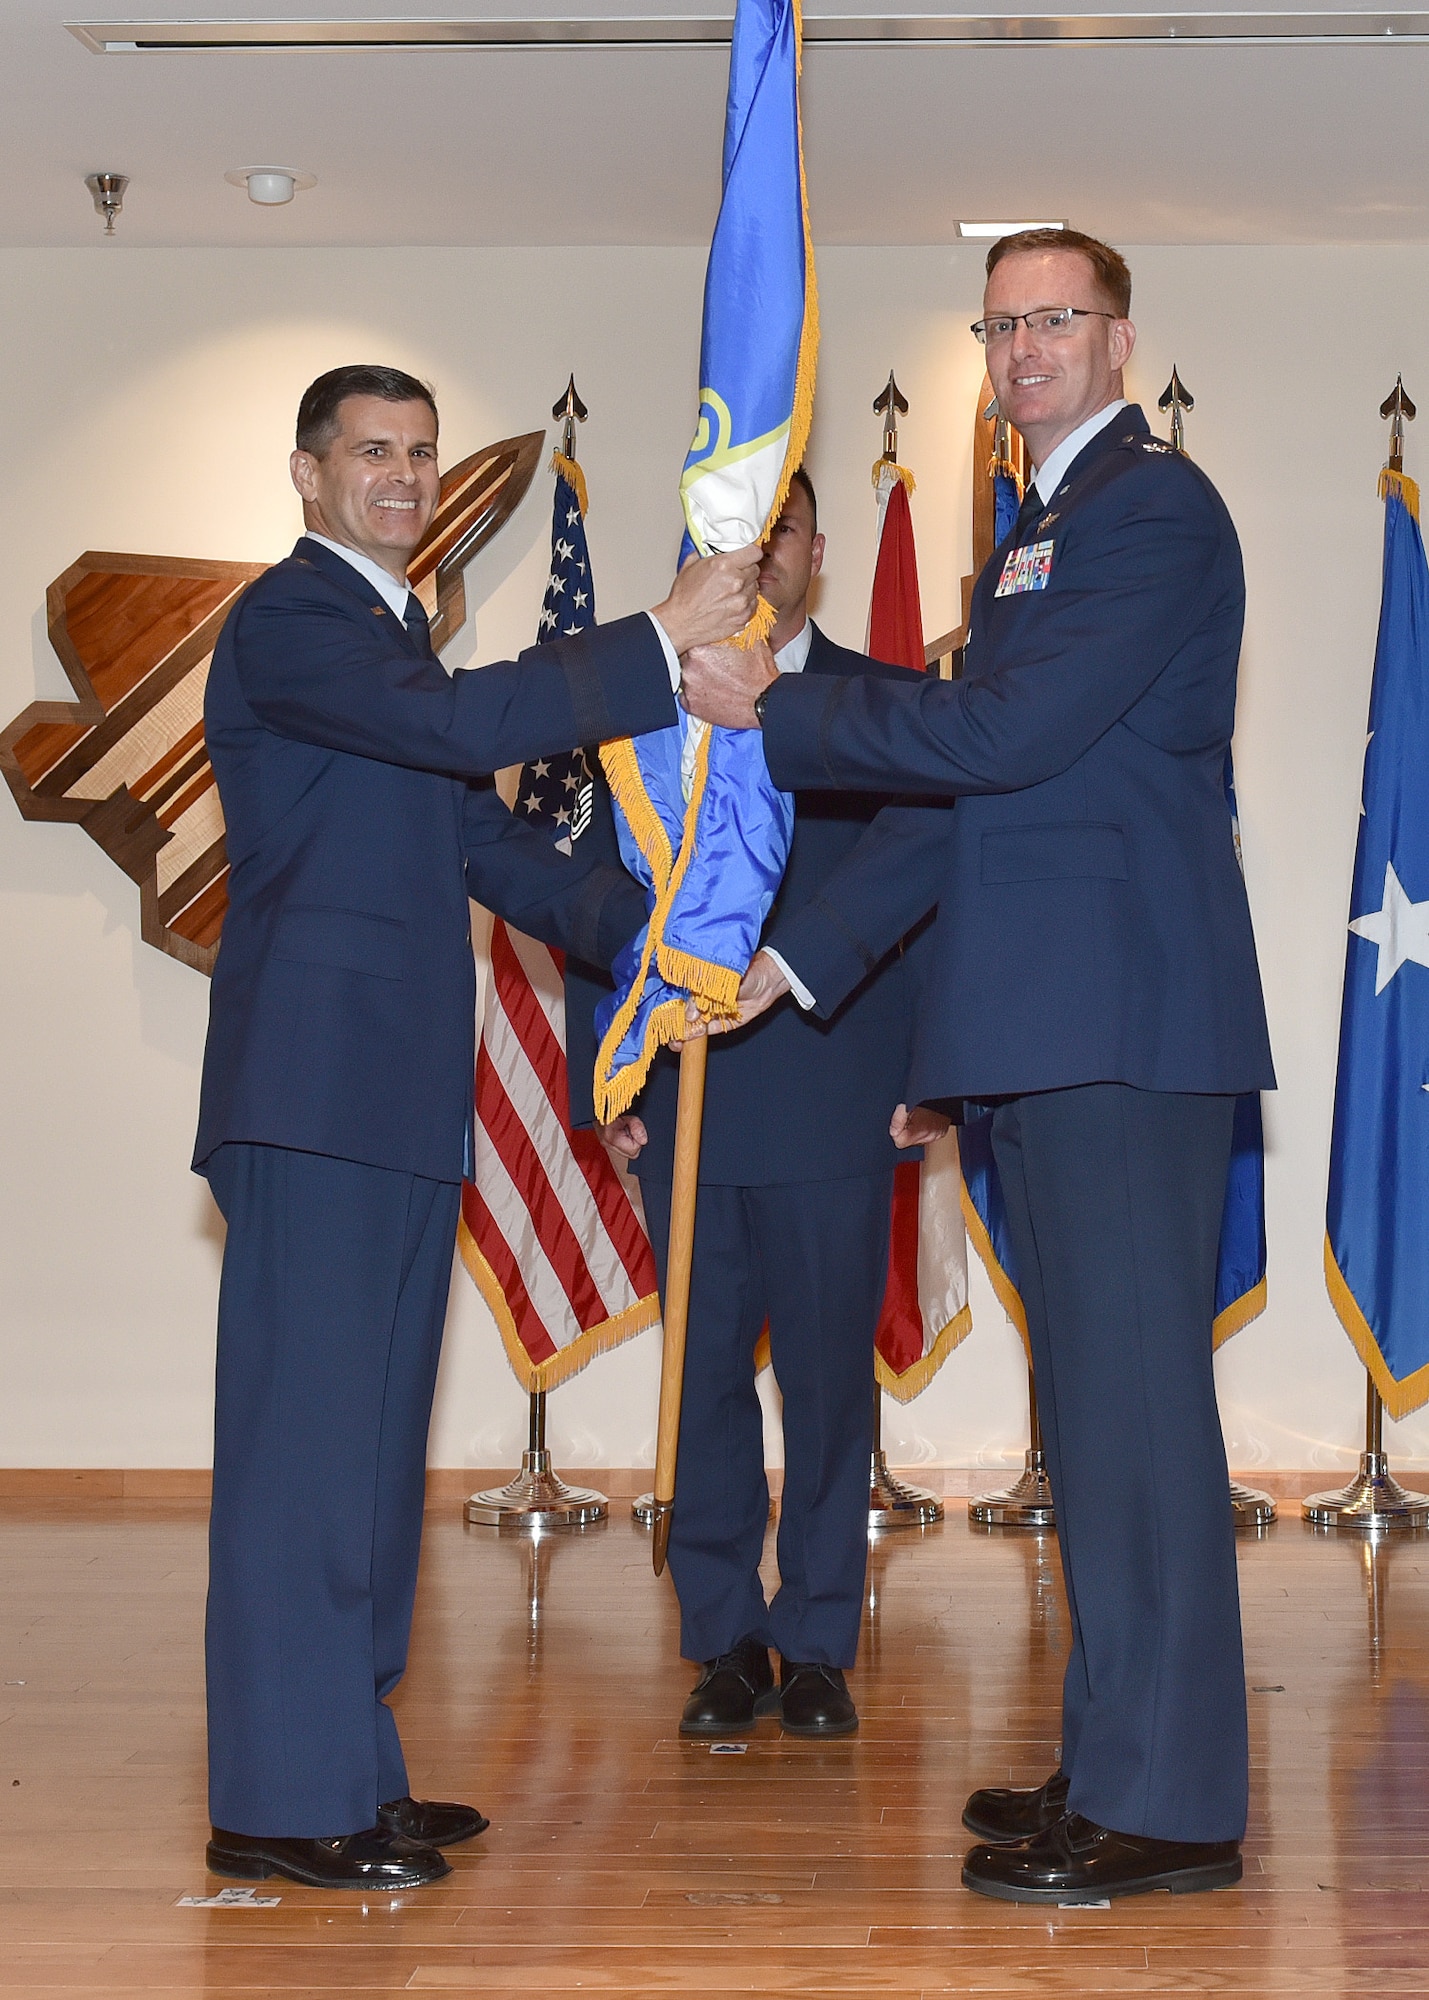 Col. Greg Krane, Continental U.S. NORAD Region – First Air Force (Air Forces Northern) deputy chief of staff, takes the ceremonial flag from Brig. Gen. Brian Simpler, Florida Air National Guard commander, during the 101st Air and Space Operations Group change of command ceremony at Tyndall Air Force Base, Florida on April 13, 2018.